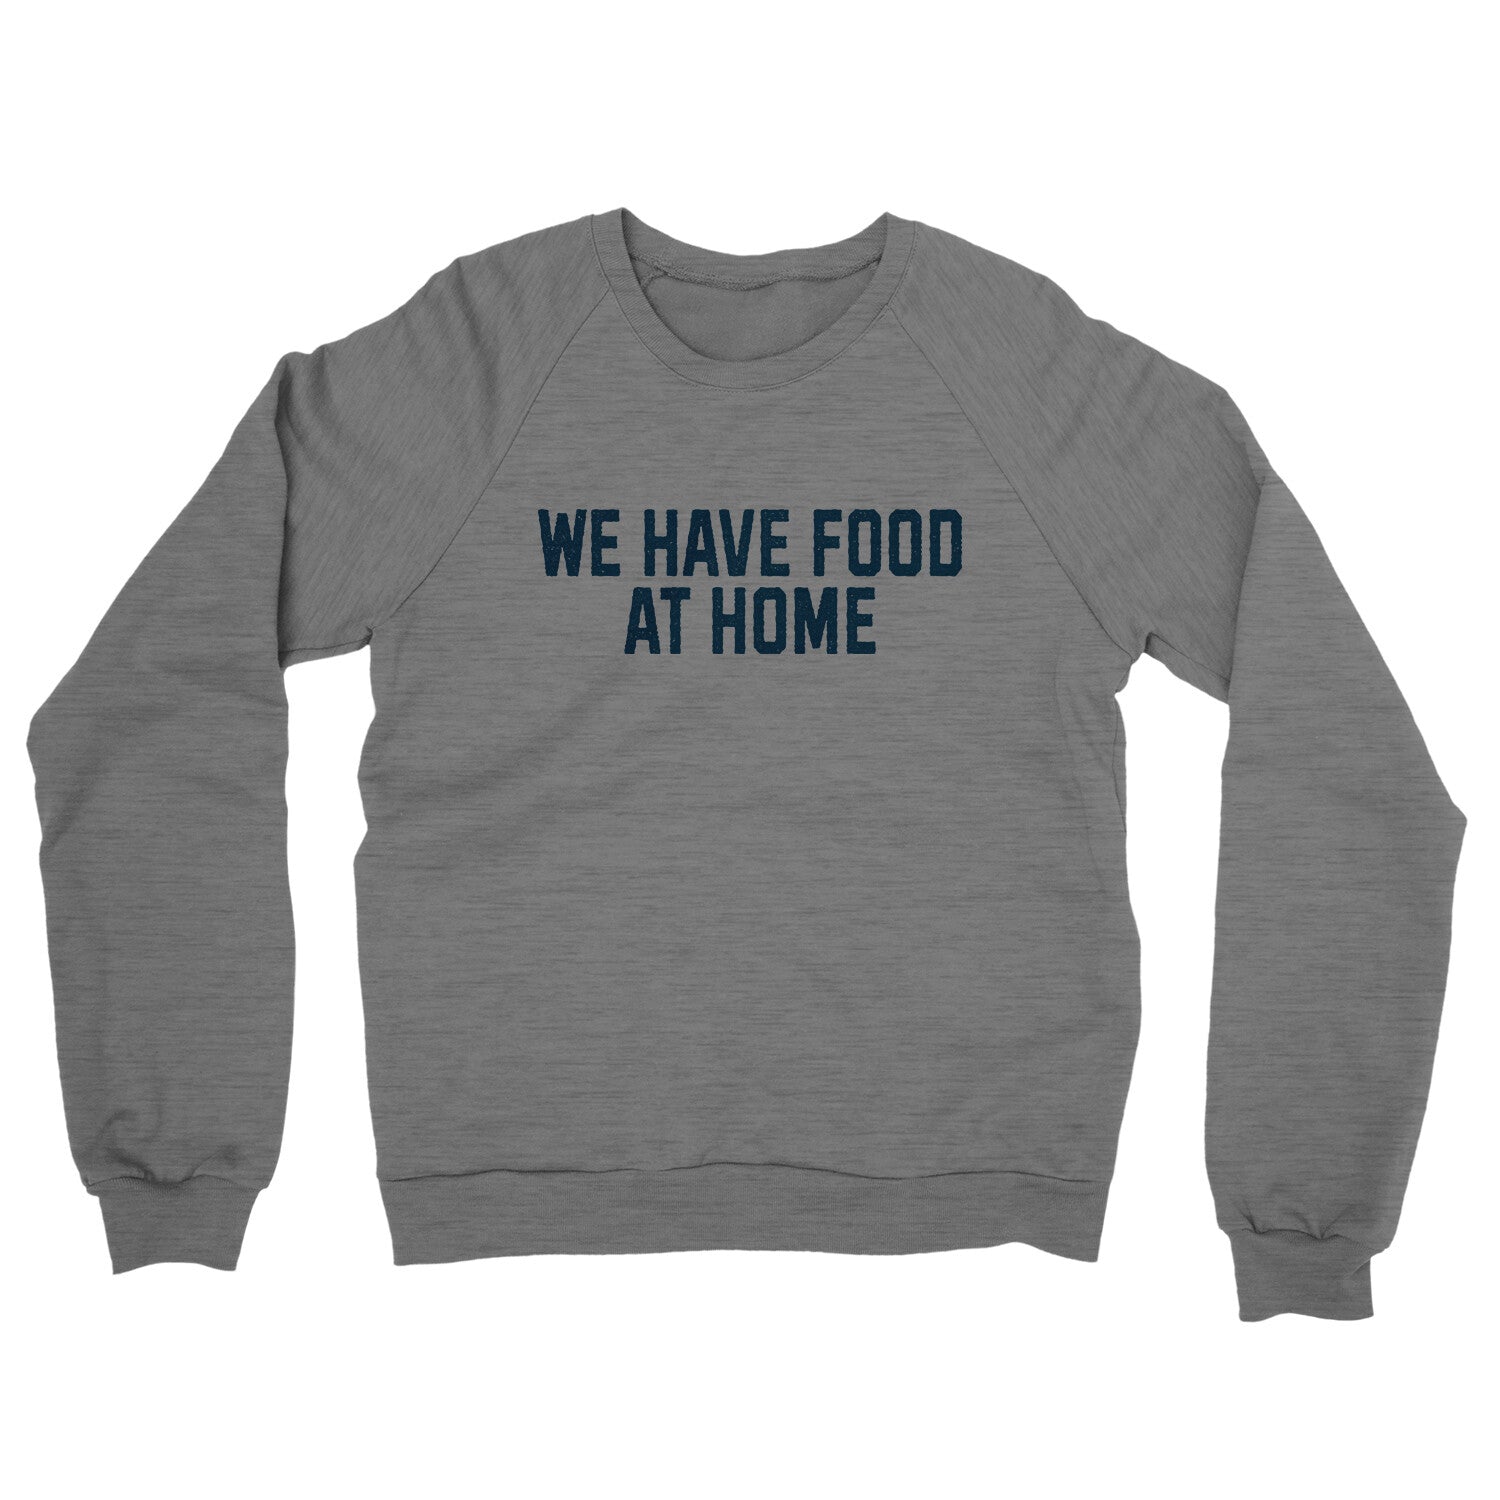 We Have Food at Home in Graphite Heather Color